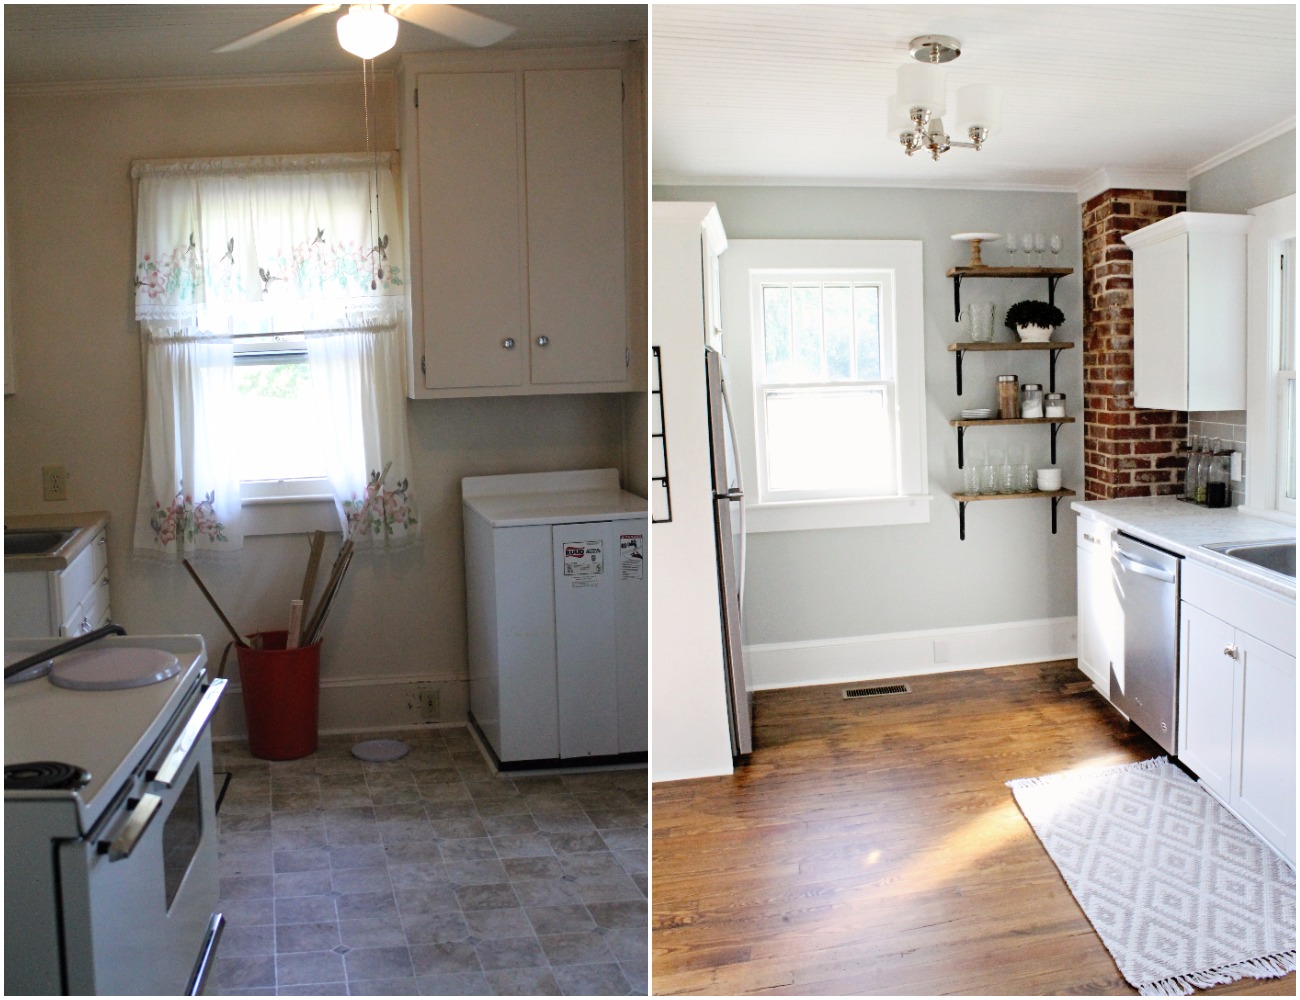 House Flipping Before and Afters - DIY BUDGET KITCHEN IDEAS WHITE SHAKER CABINETS (4).jpg